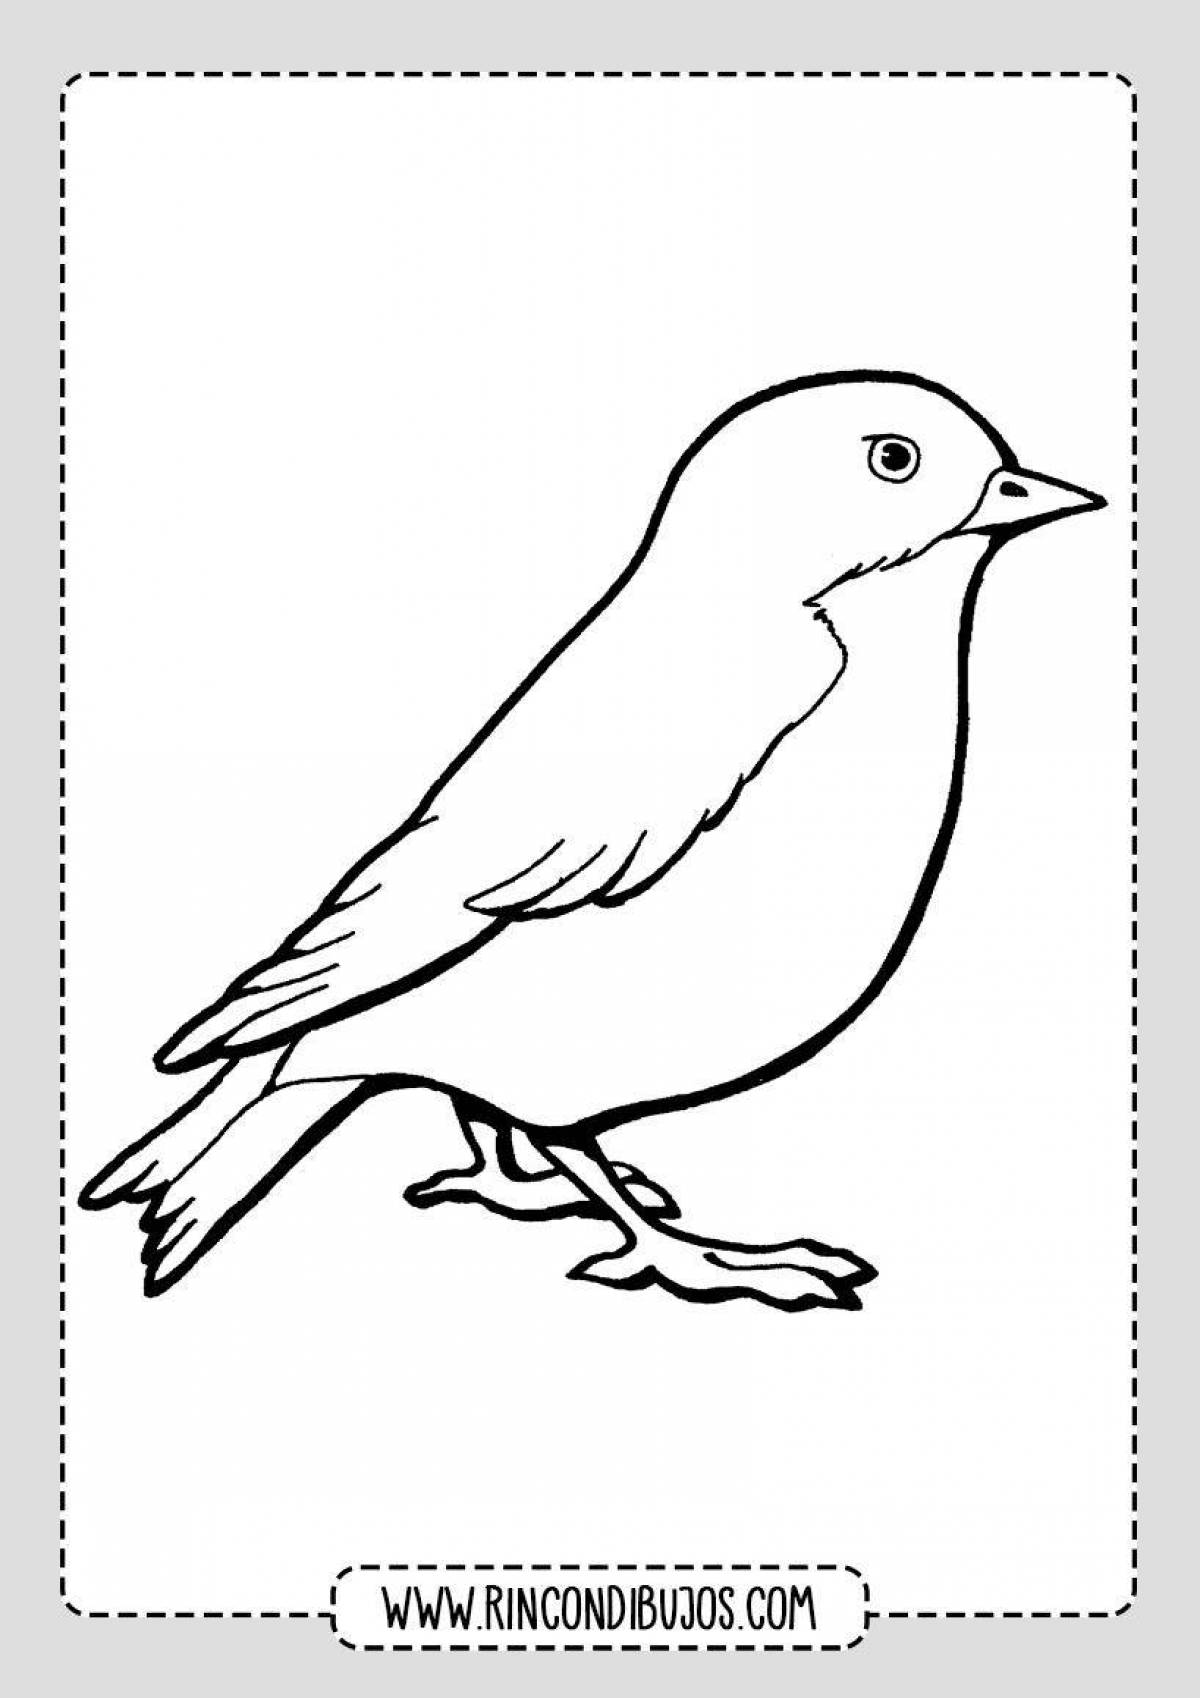 Fun sparrow coloring book for kids